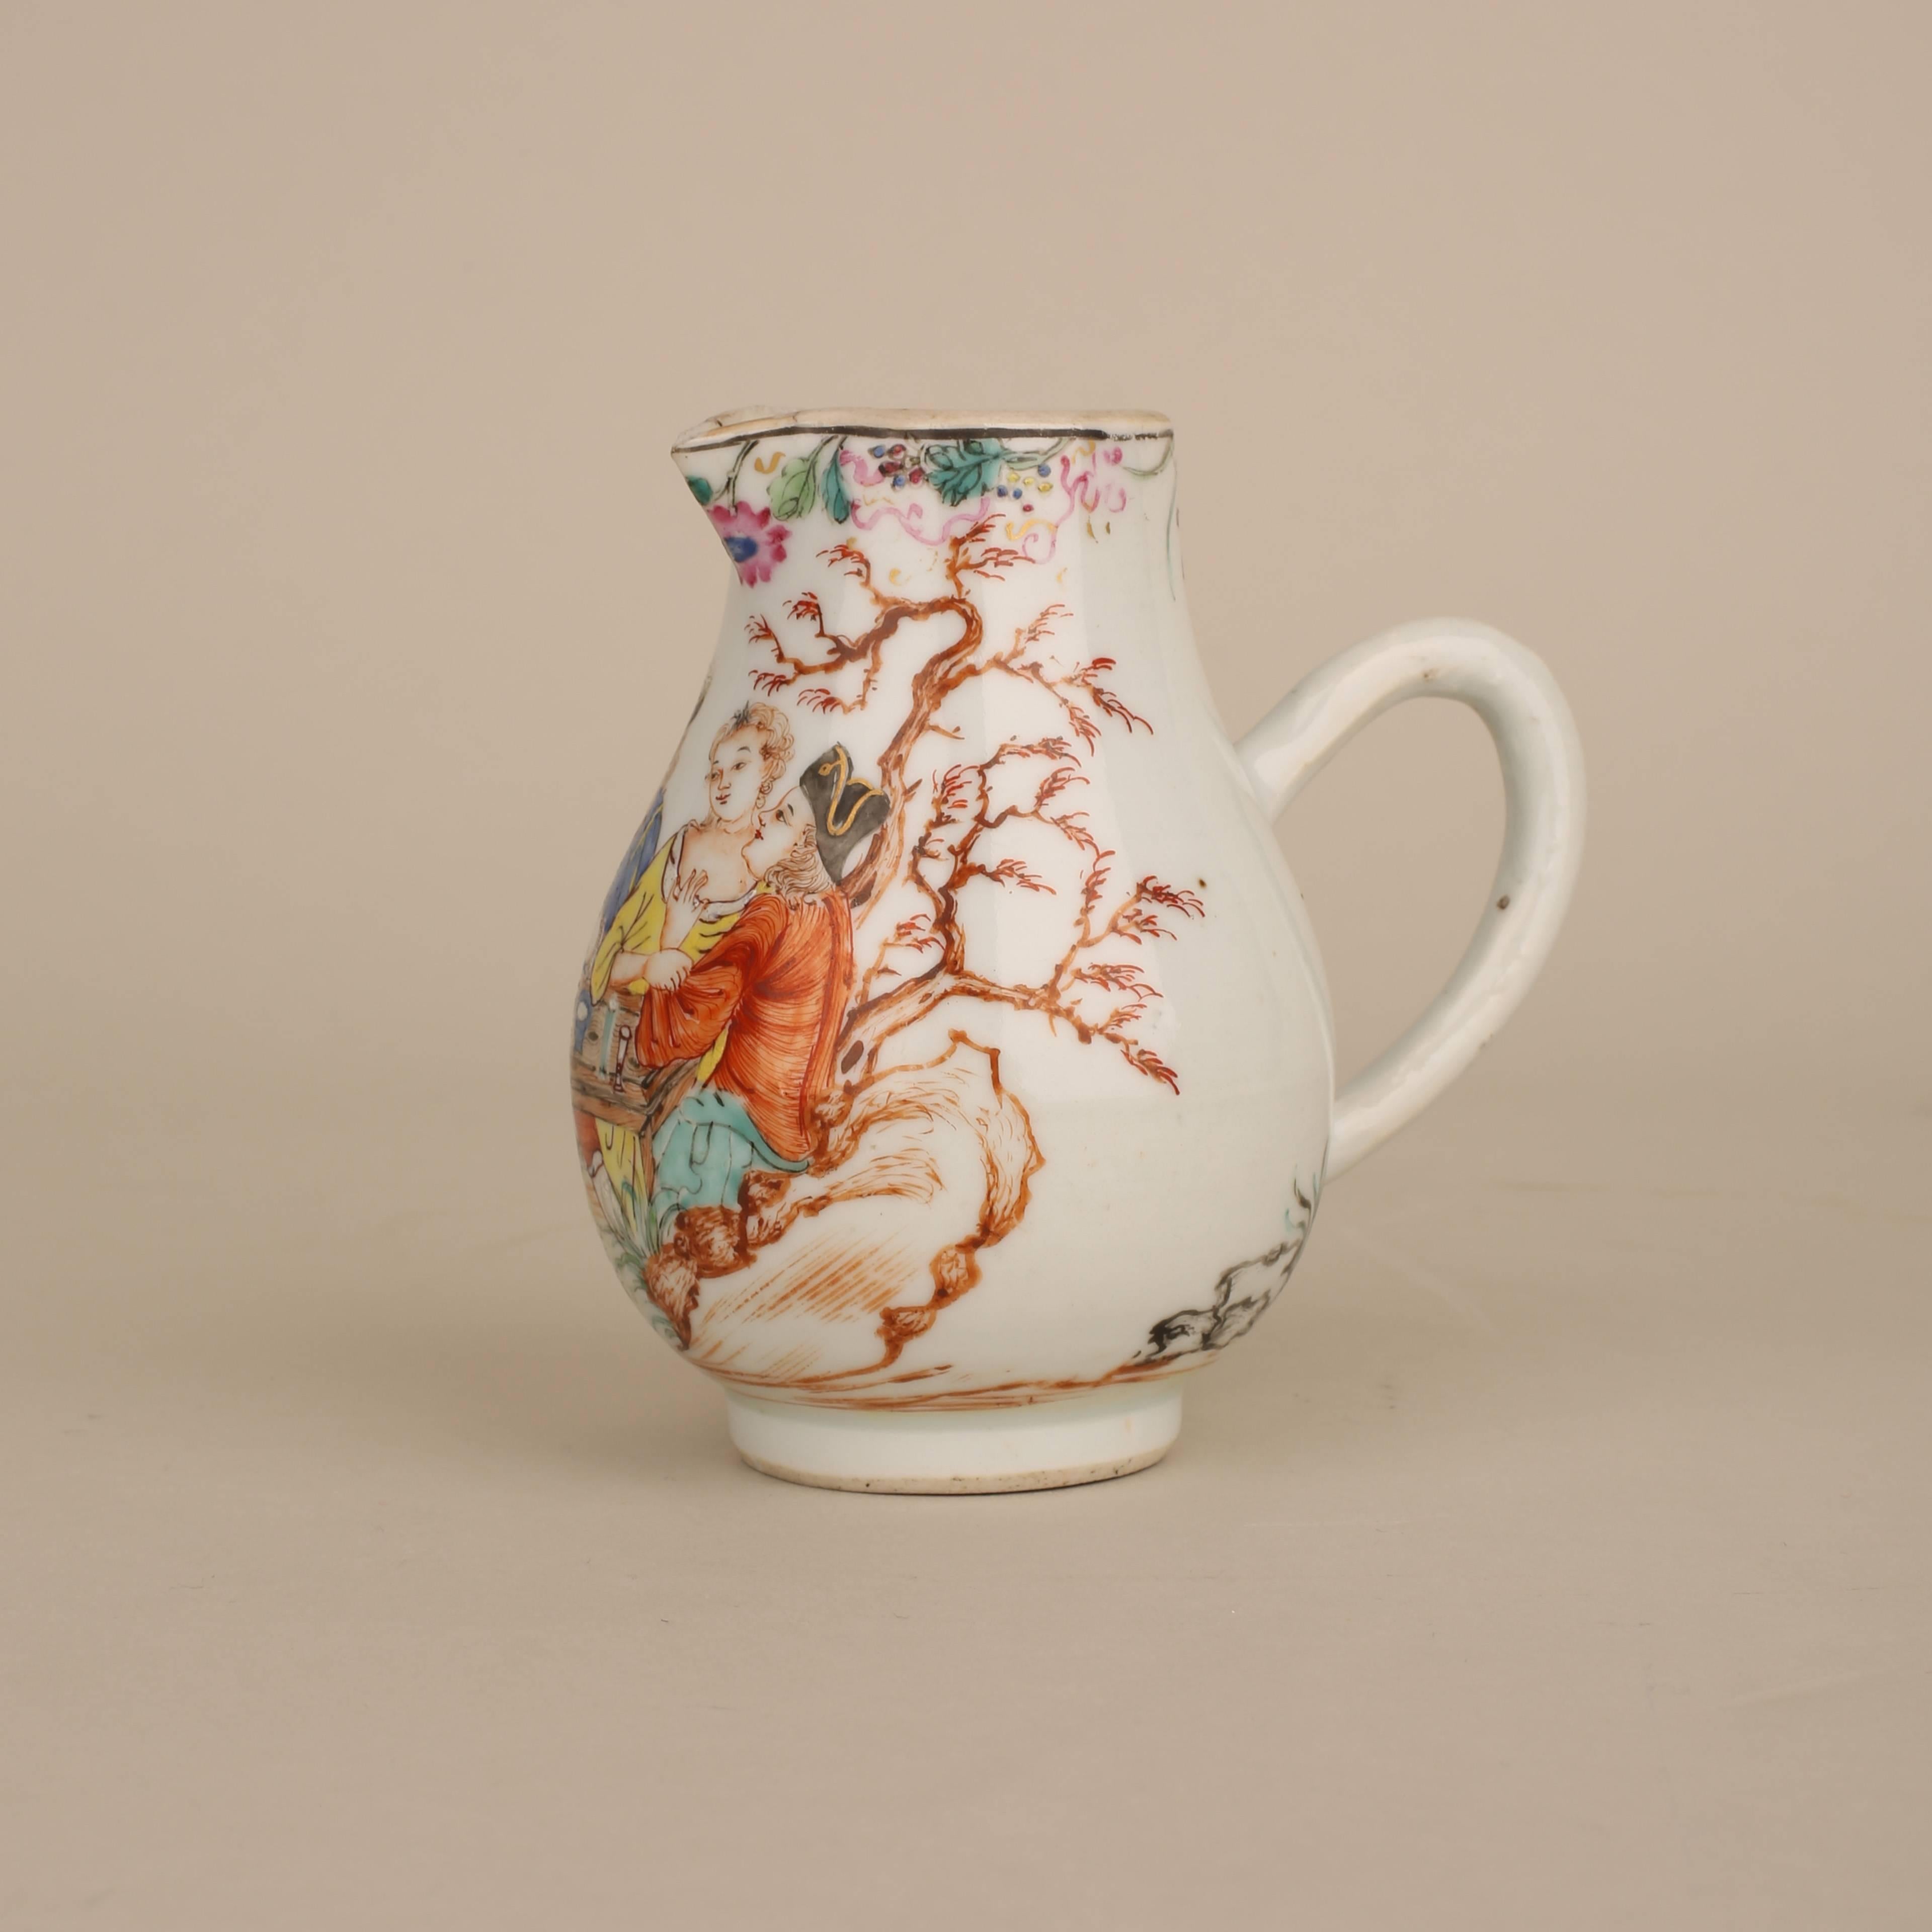 A Chinese export porcelain cream jug painted in enamels with two European amorous couples seated at a table surrounded by rocks and trees.

Measures: 9.6cm high.

Qianlong, 1736-1795.

Condition: Natural fire flaw at the spout.